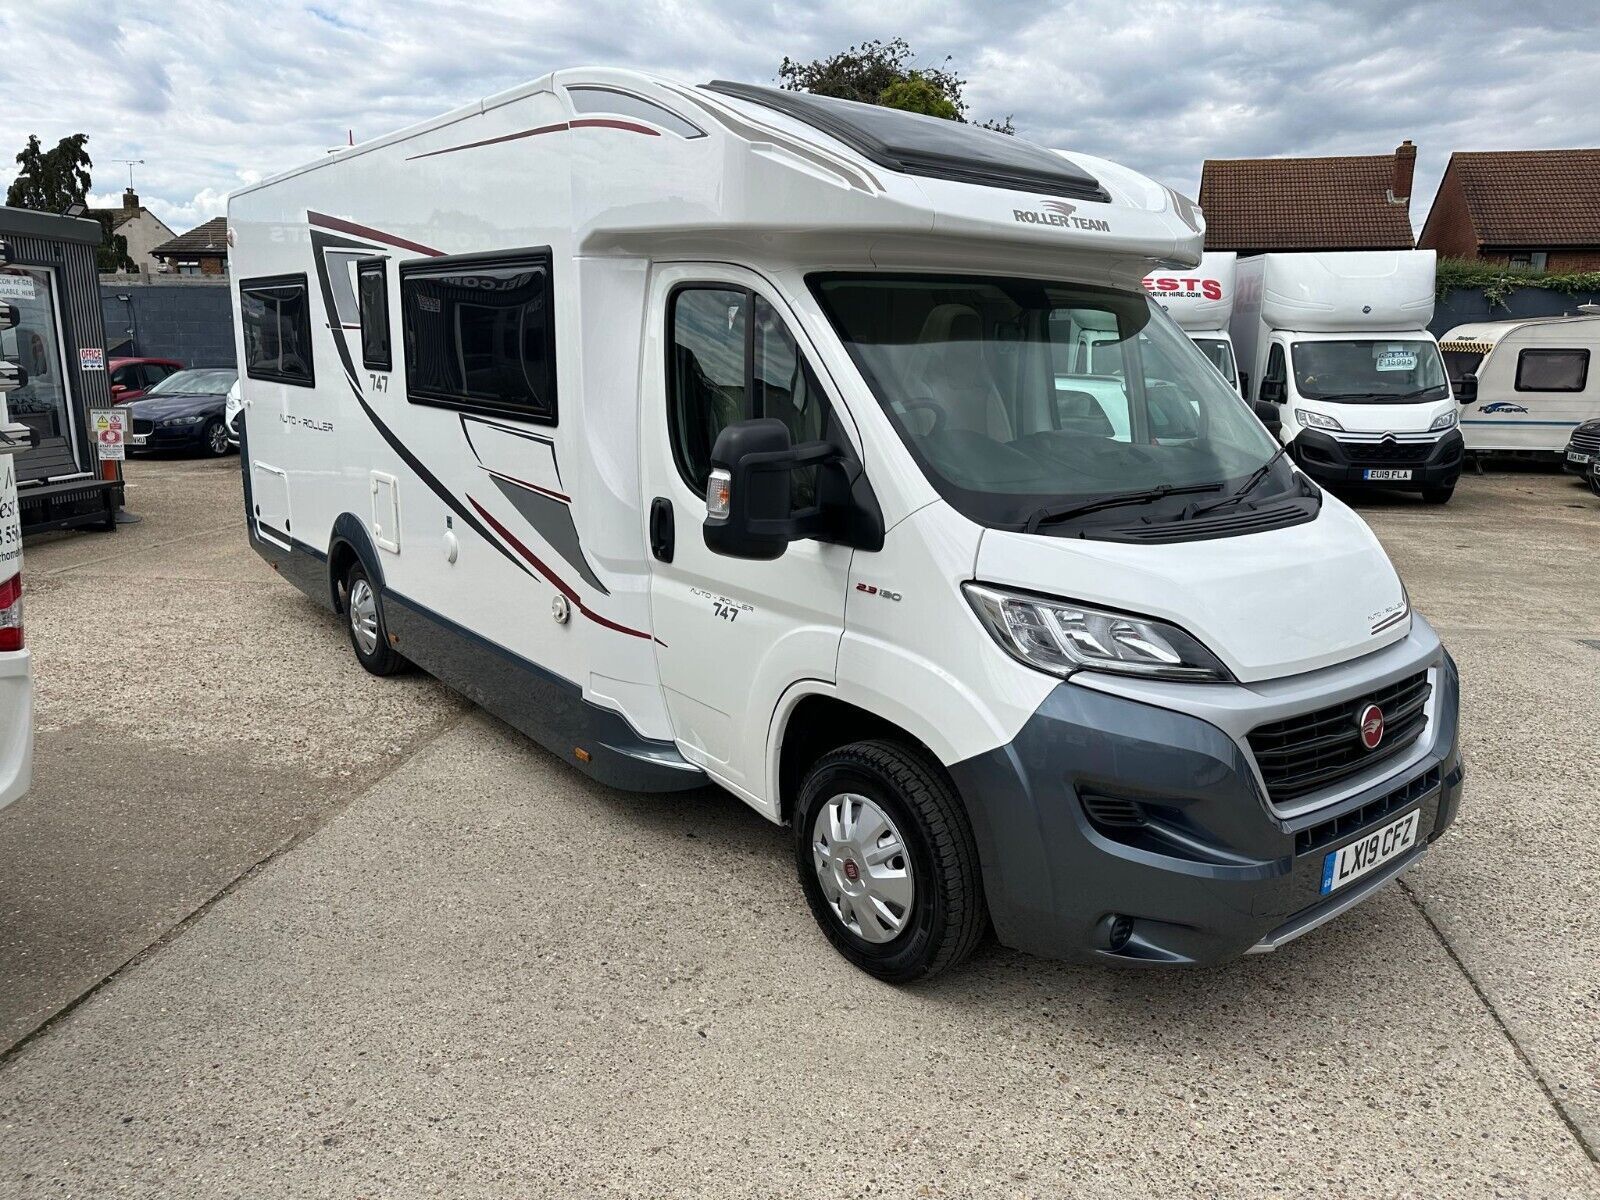 automatic 6 berth motorhome for sale roller team auto roller 747 luxury camper van used secondhand